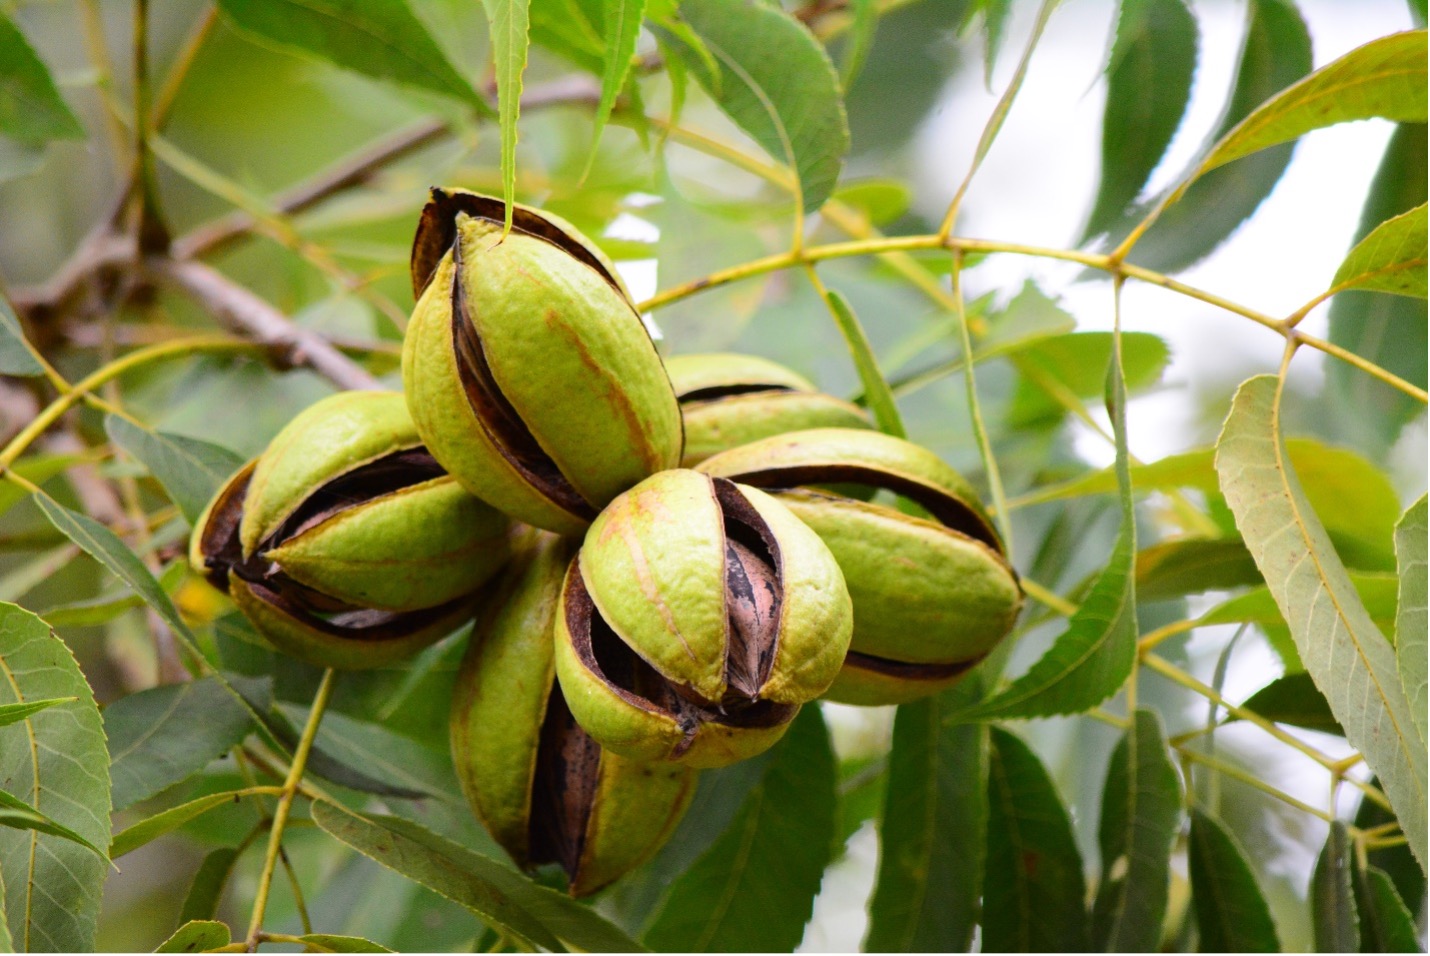 Cluster of pecan nuts on a tree